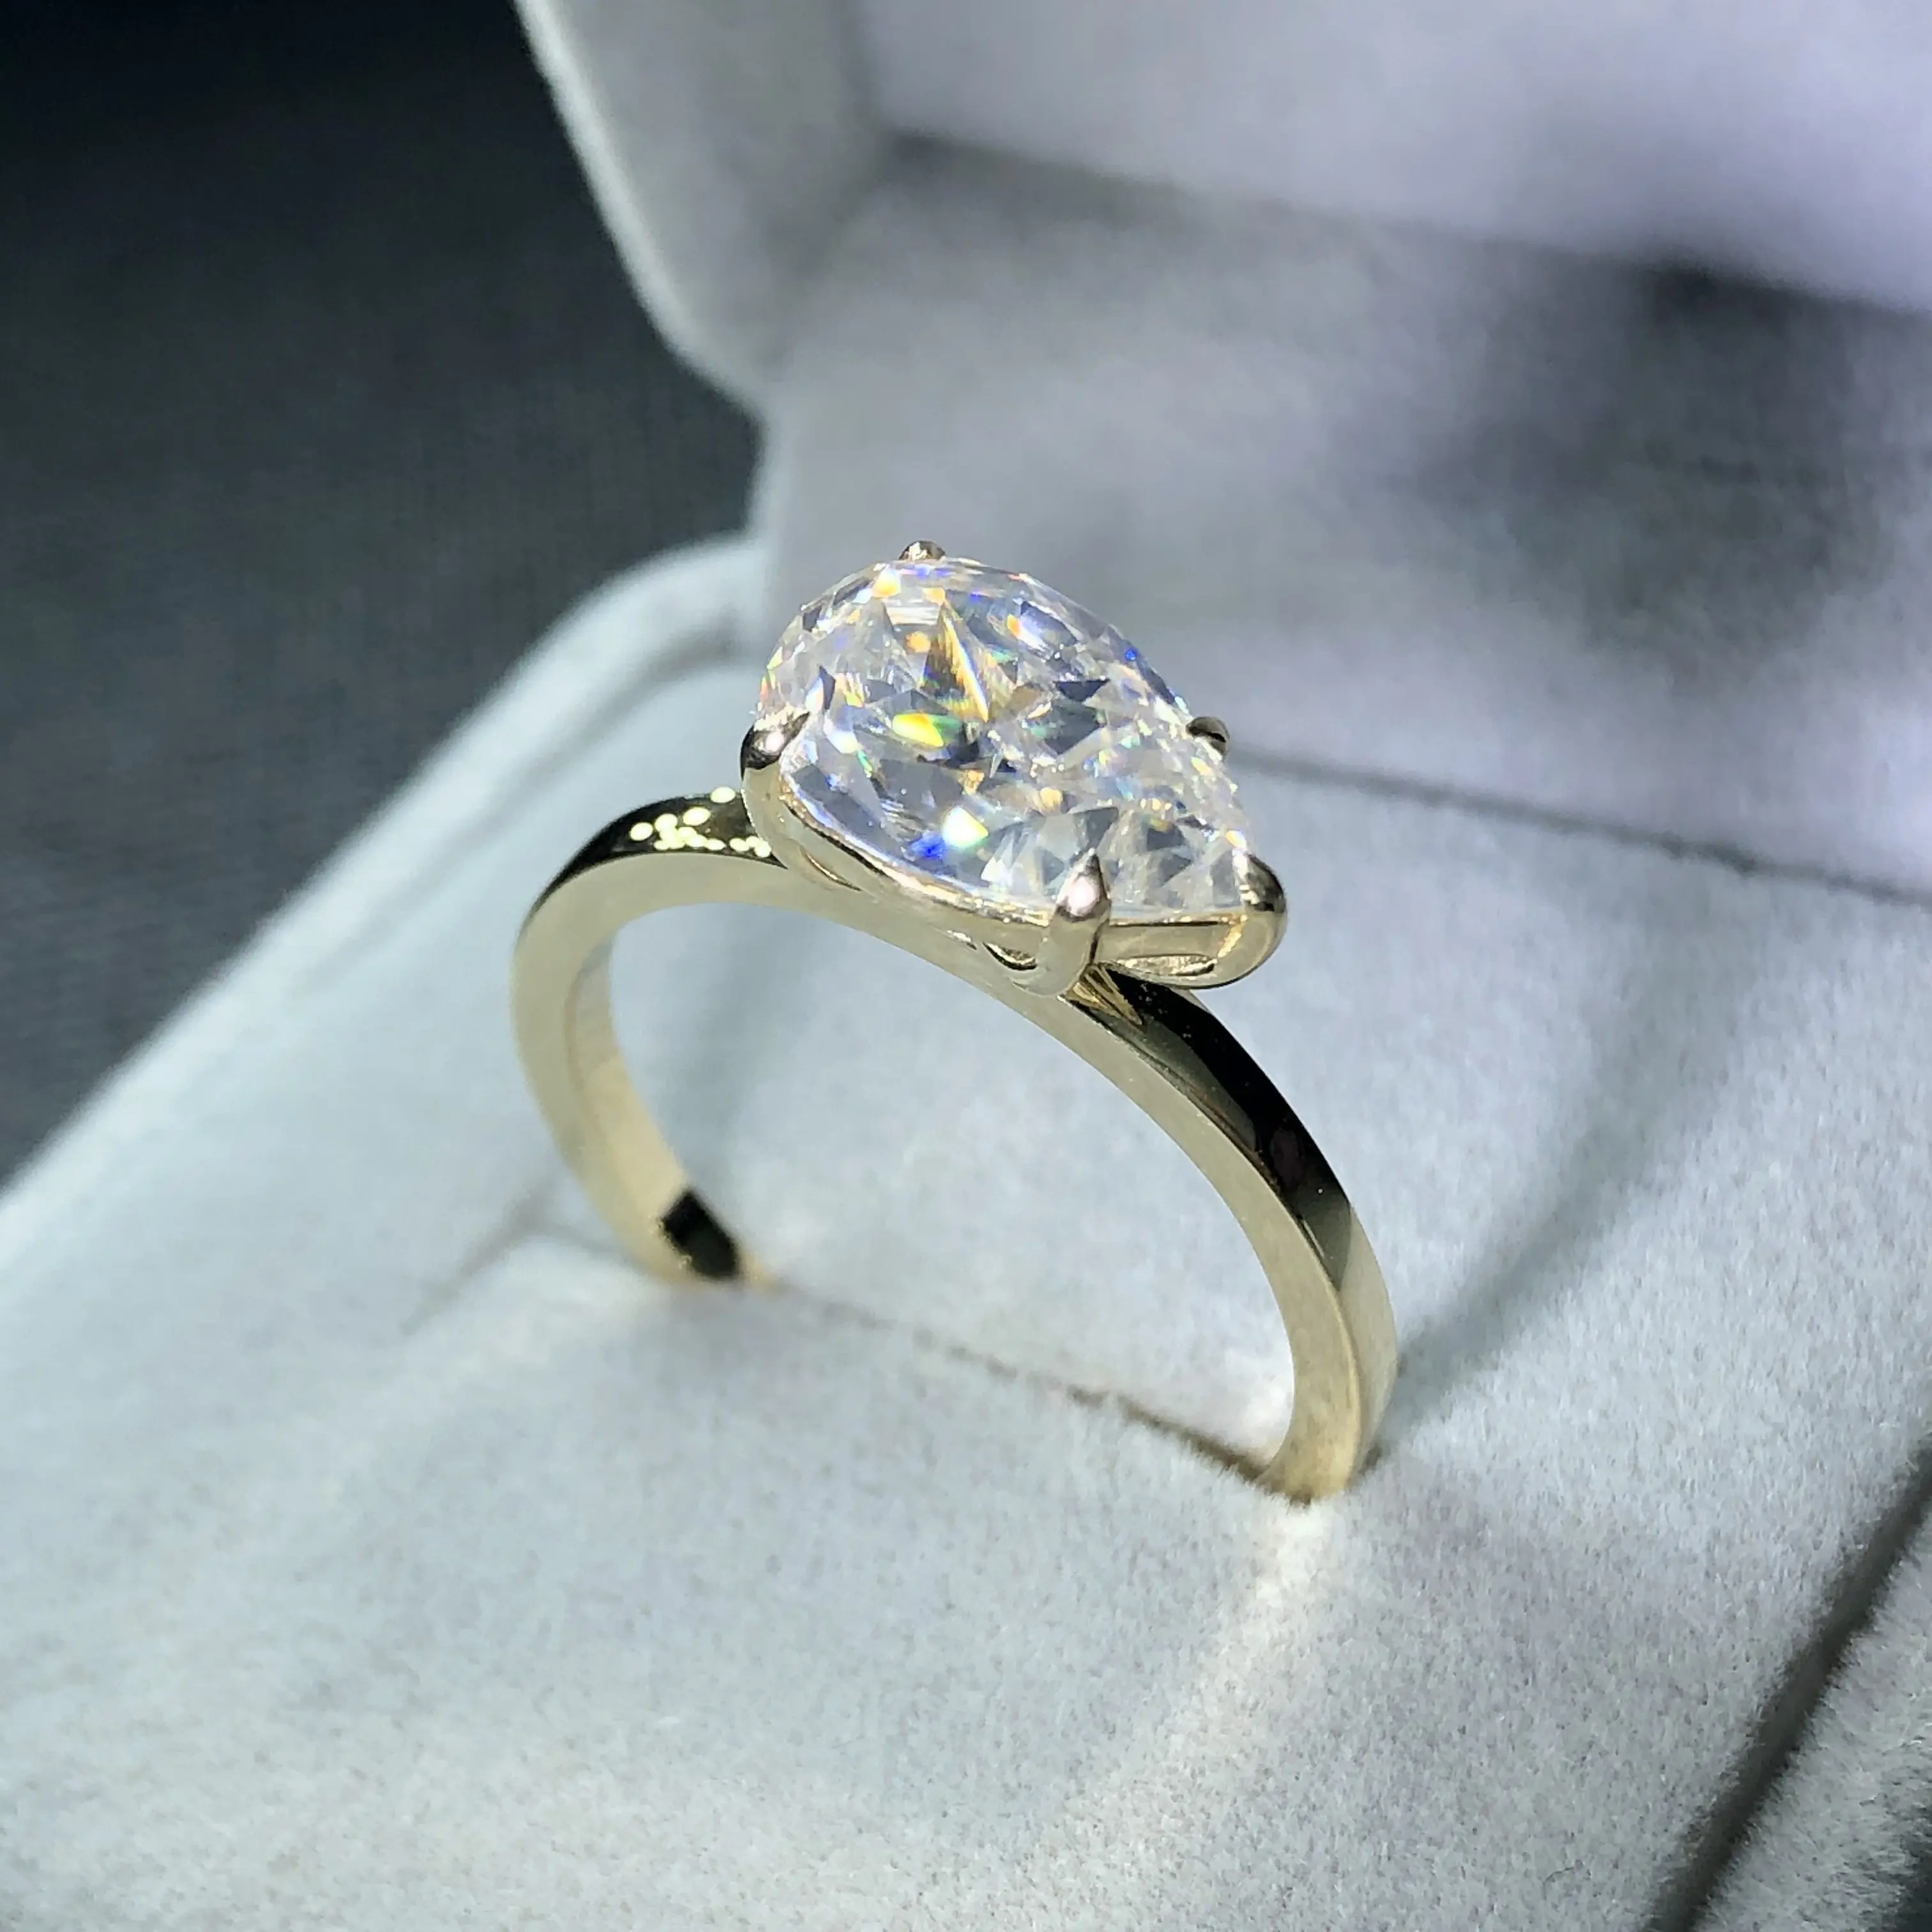 Fashion Jewelry 9k 14k 18k Yellow Gold Set Pear Cut Gemstone Moissanite Wedding Rings with D Color 1ct Super White Engagement